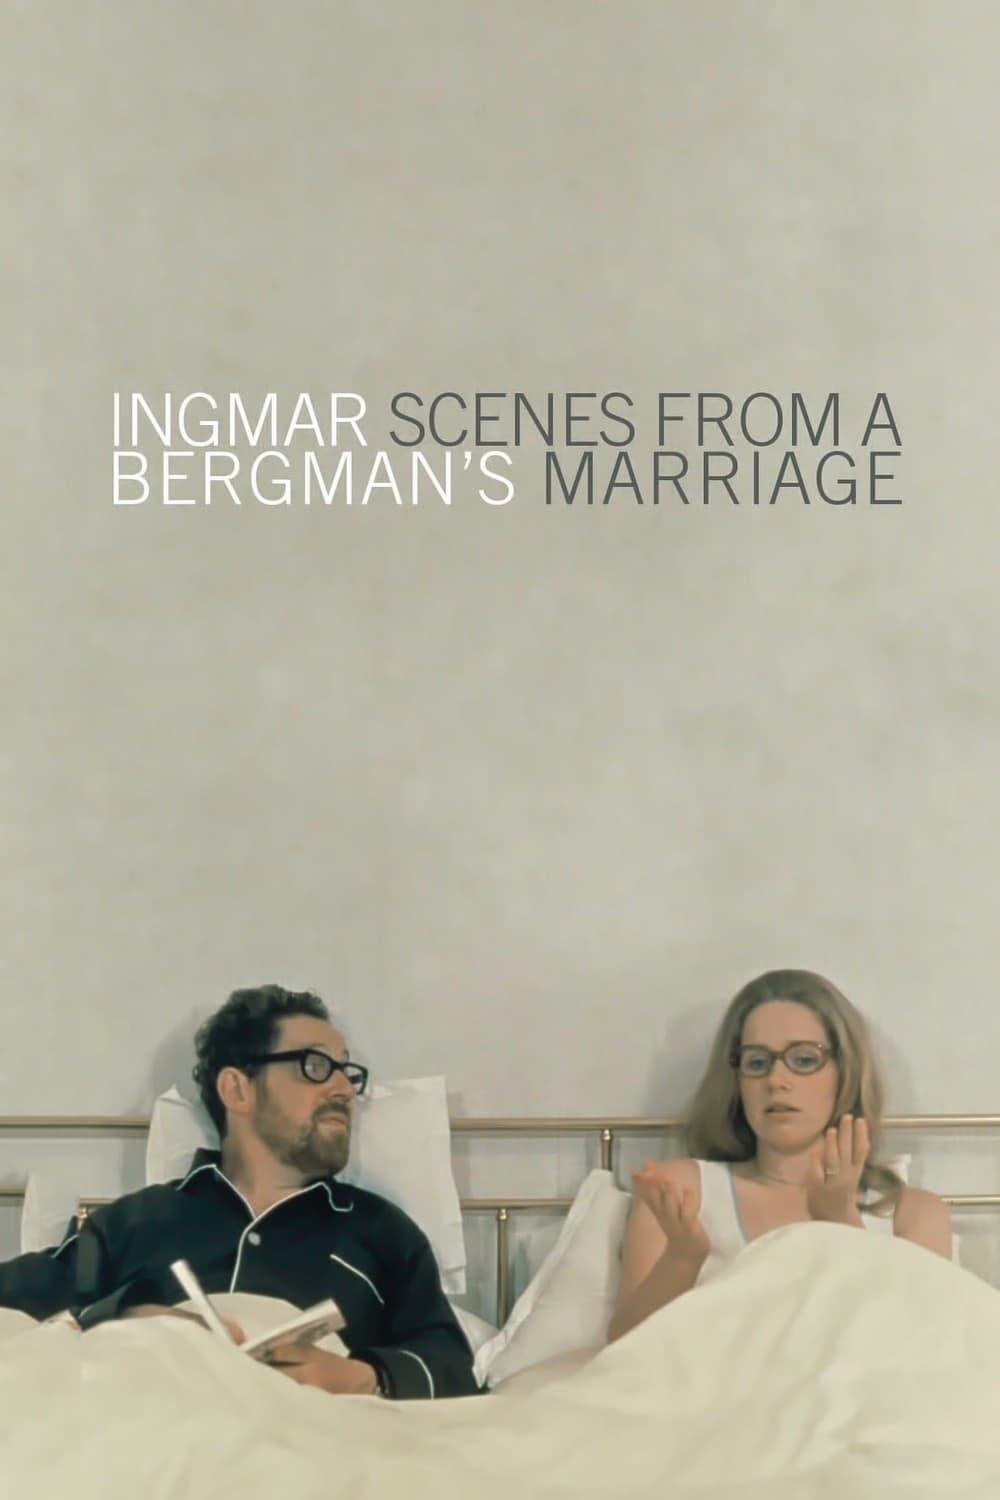 Scenes from a Marriage poster